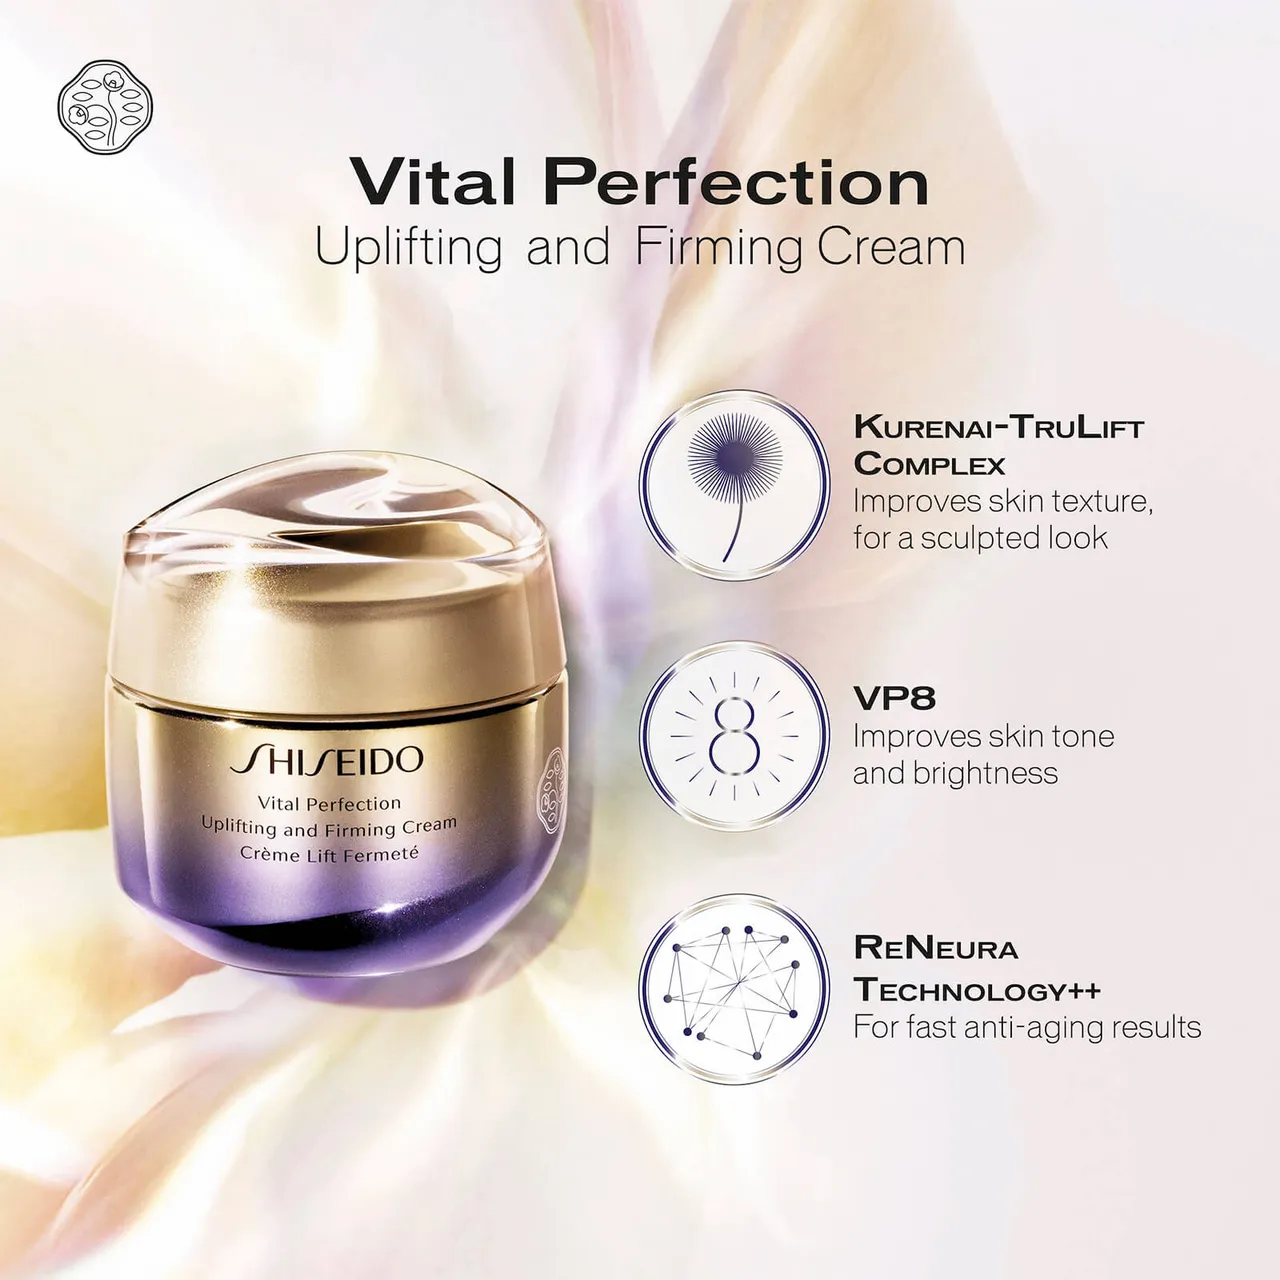 Shiseido Vital Perfection Uplifting and Firming Cream (Various Sizes) - 75ml